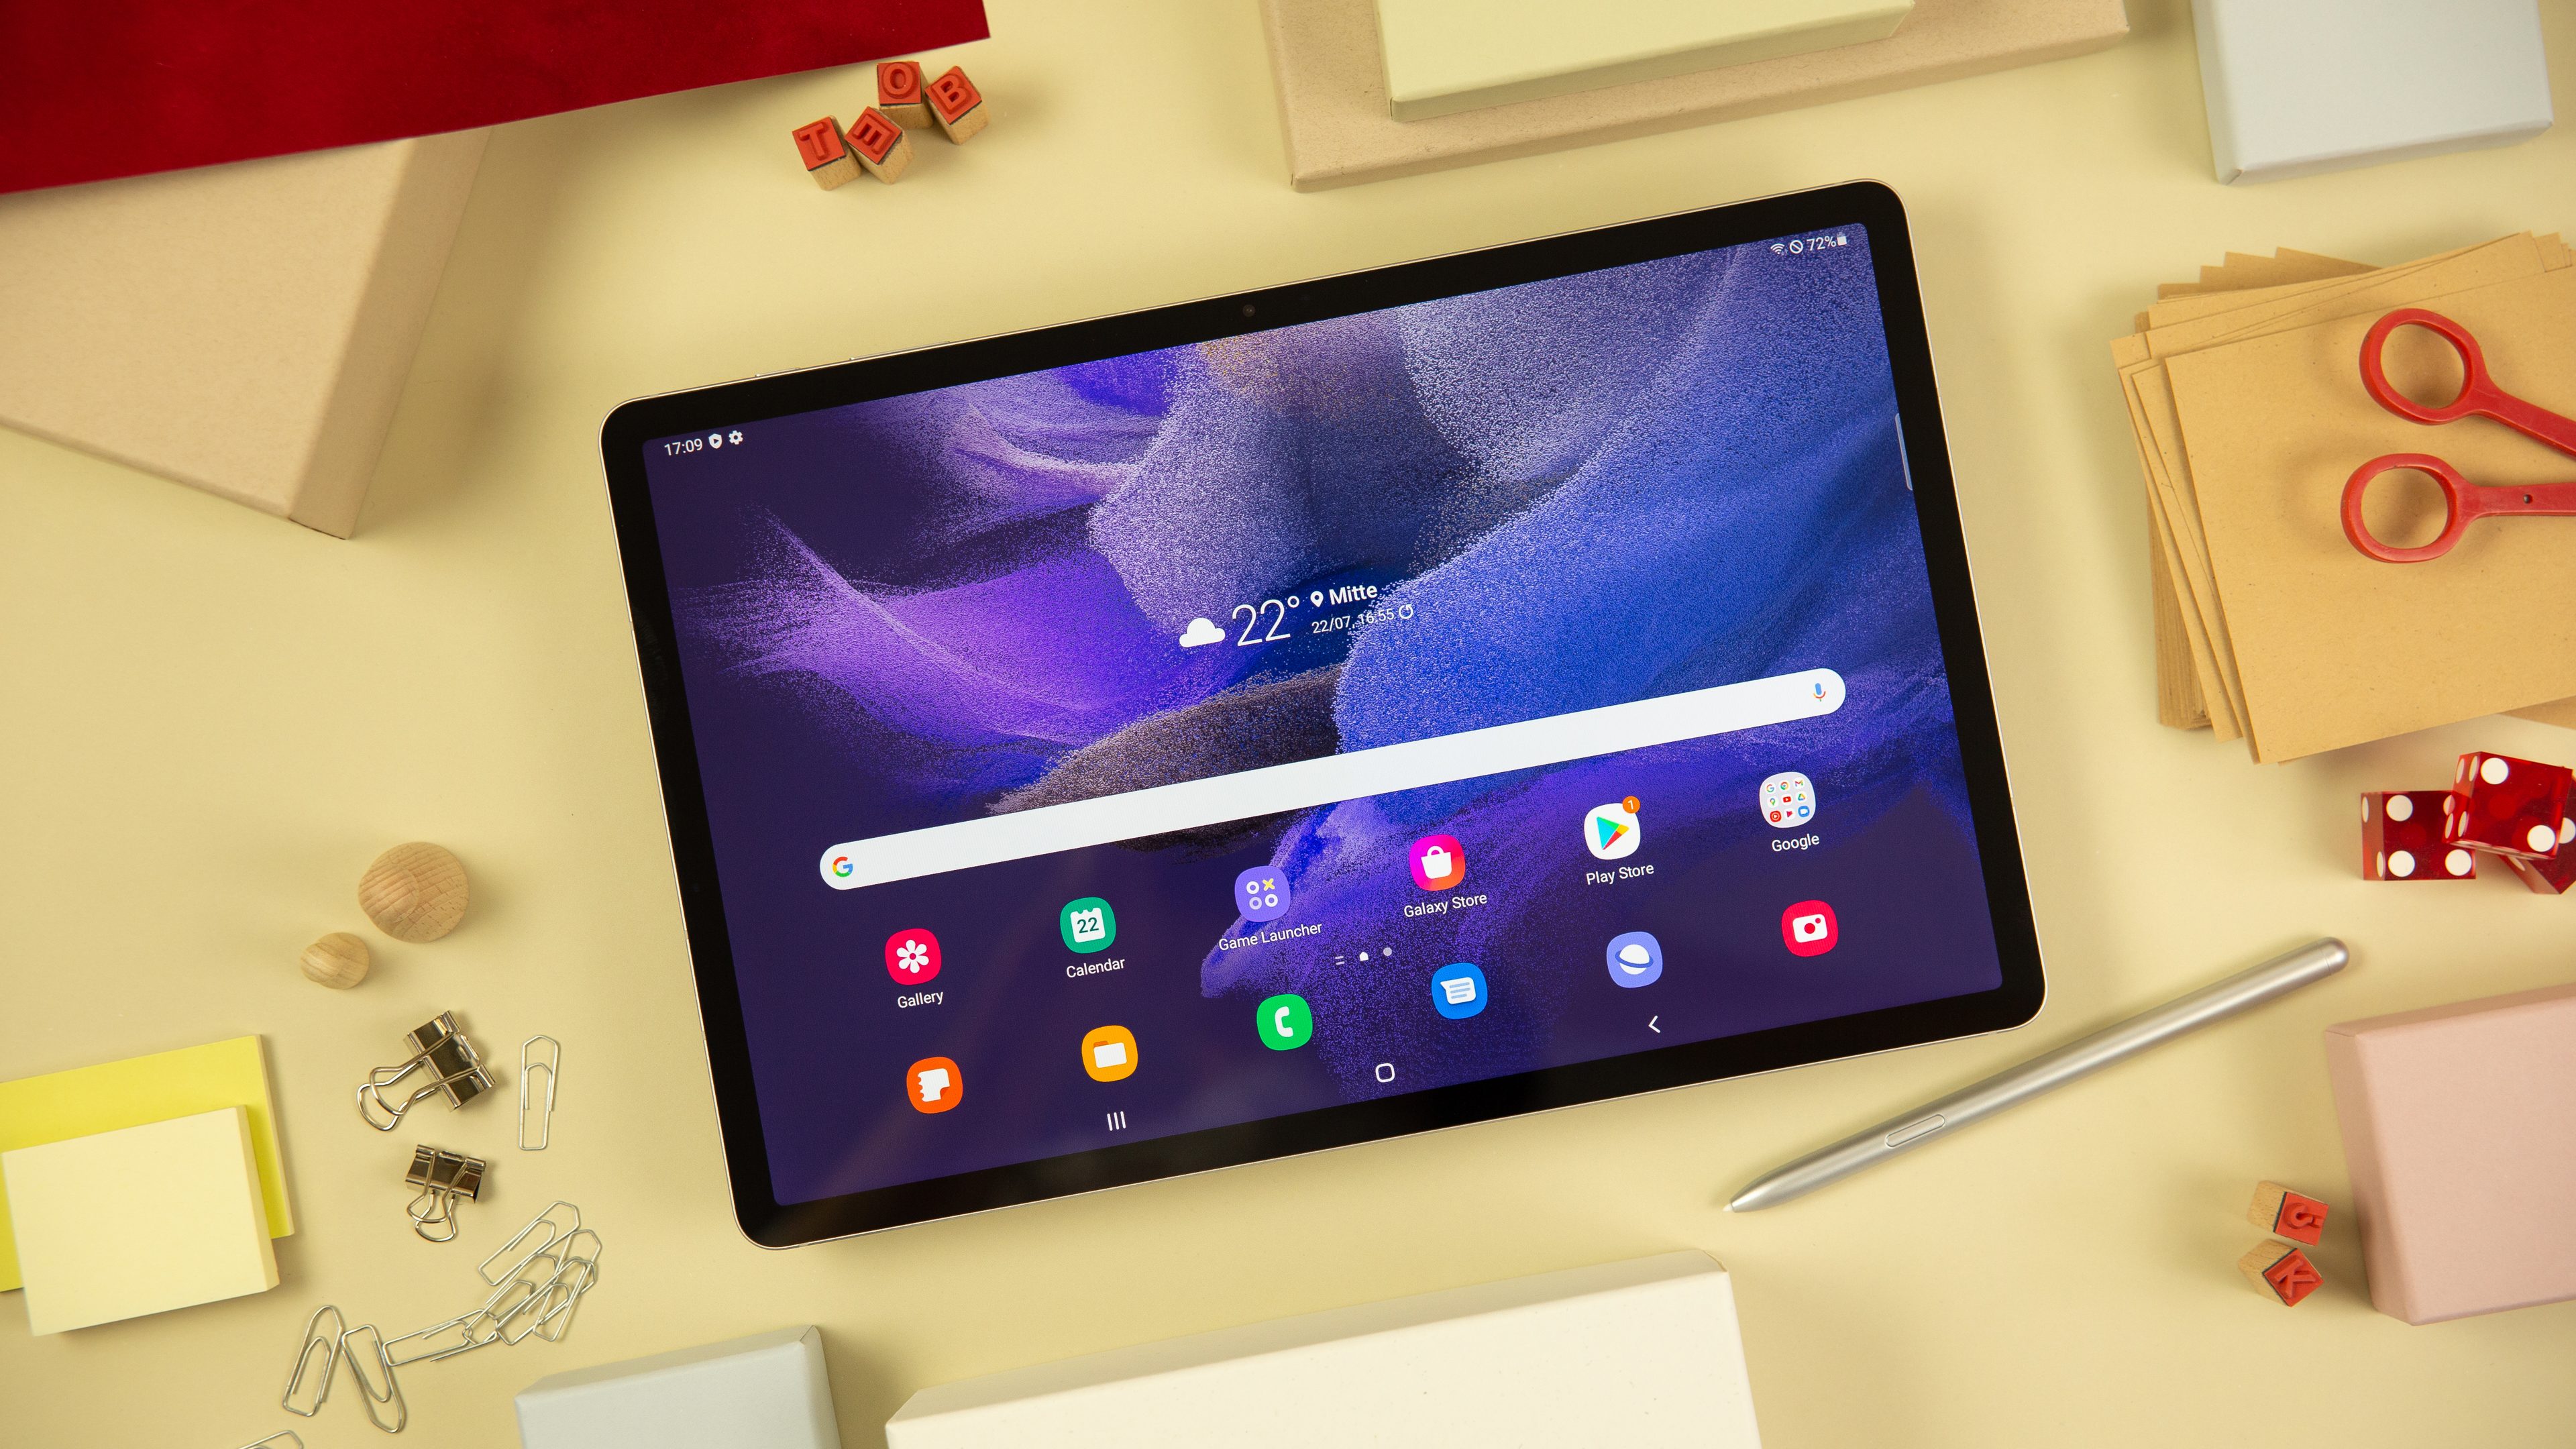 Samsung Galaxy Tab S7 Review: A mid-tier tablet for Android fans